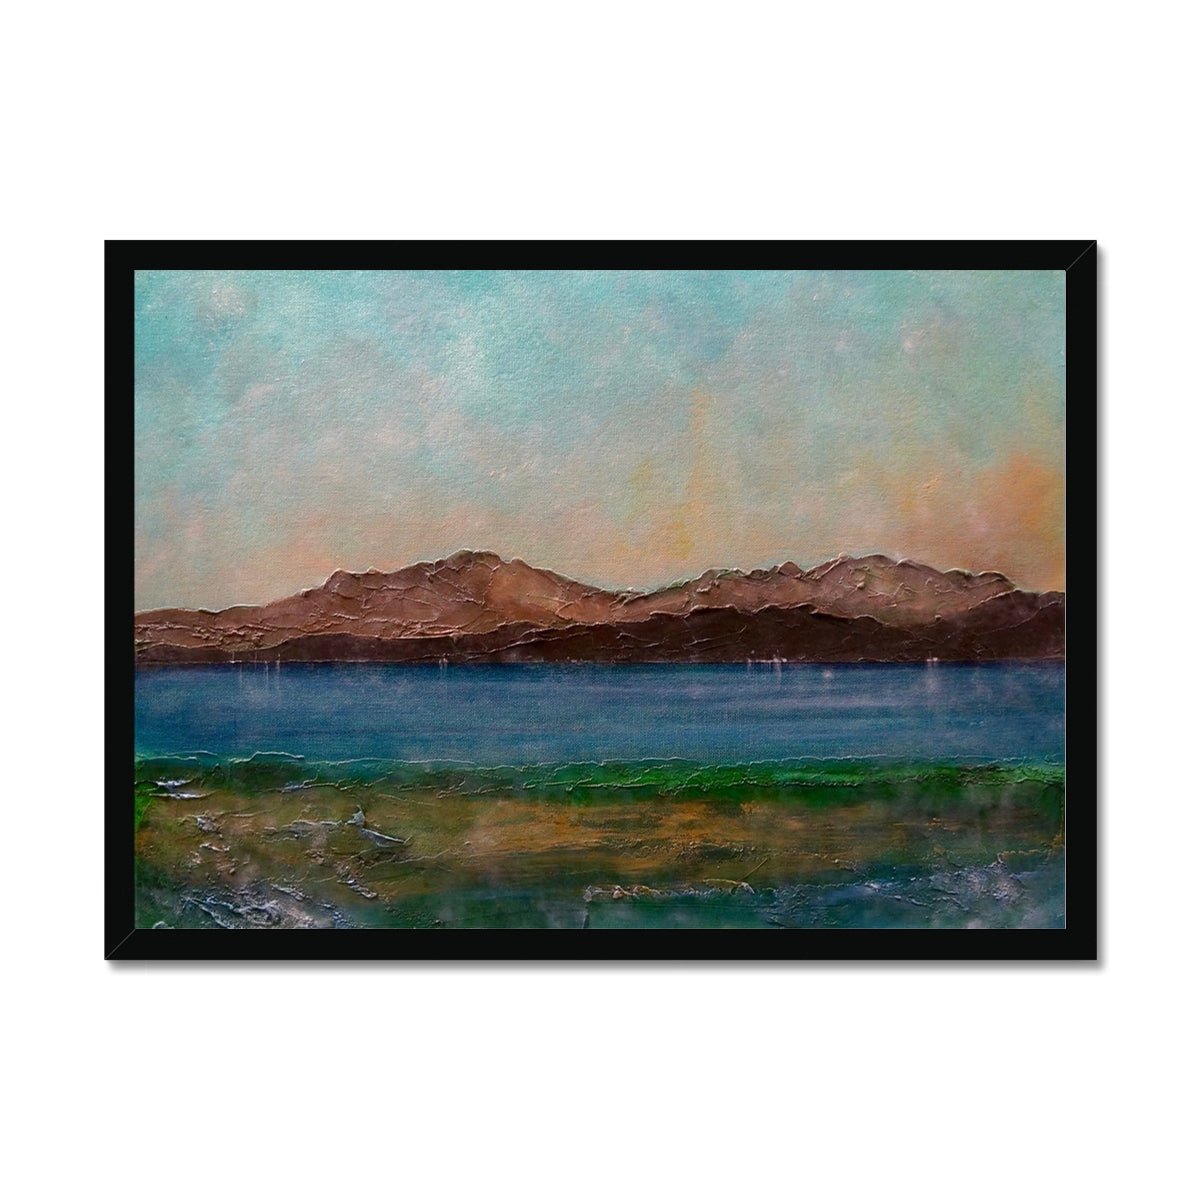 Arran From Scalpsie Bay Painting | Framed Prints From Scotland-Framed Prints-Arran Art Gallery-A2 Landscape-Black Frame-Paintings, Prints, Homeware, Art Gifts From Scotland By Scottish Artist Kevin Hunter